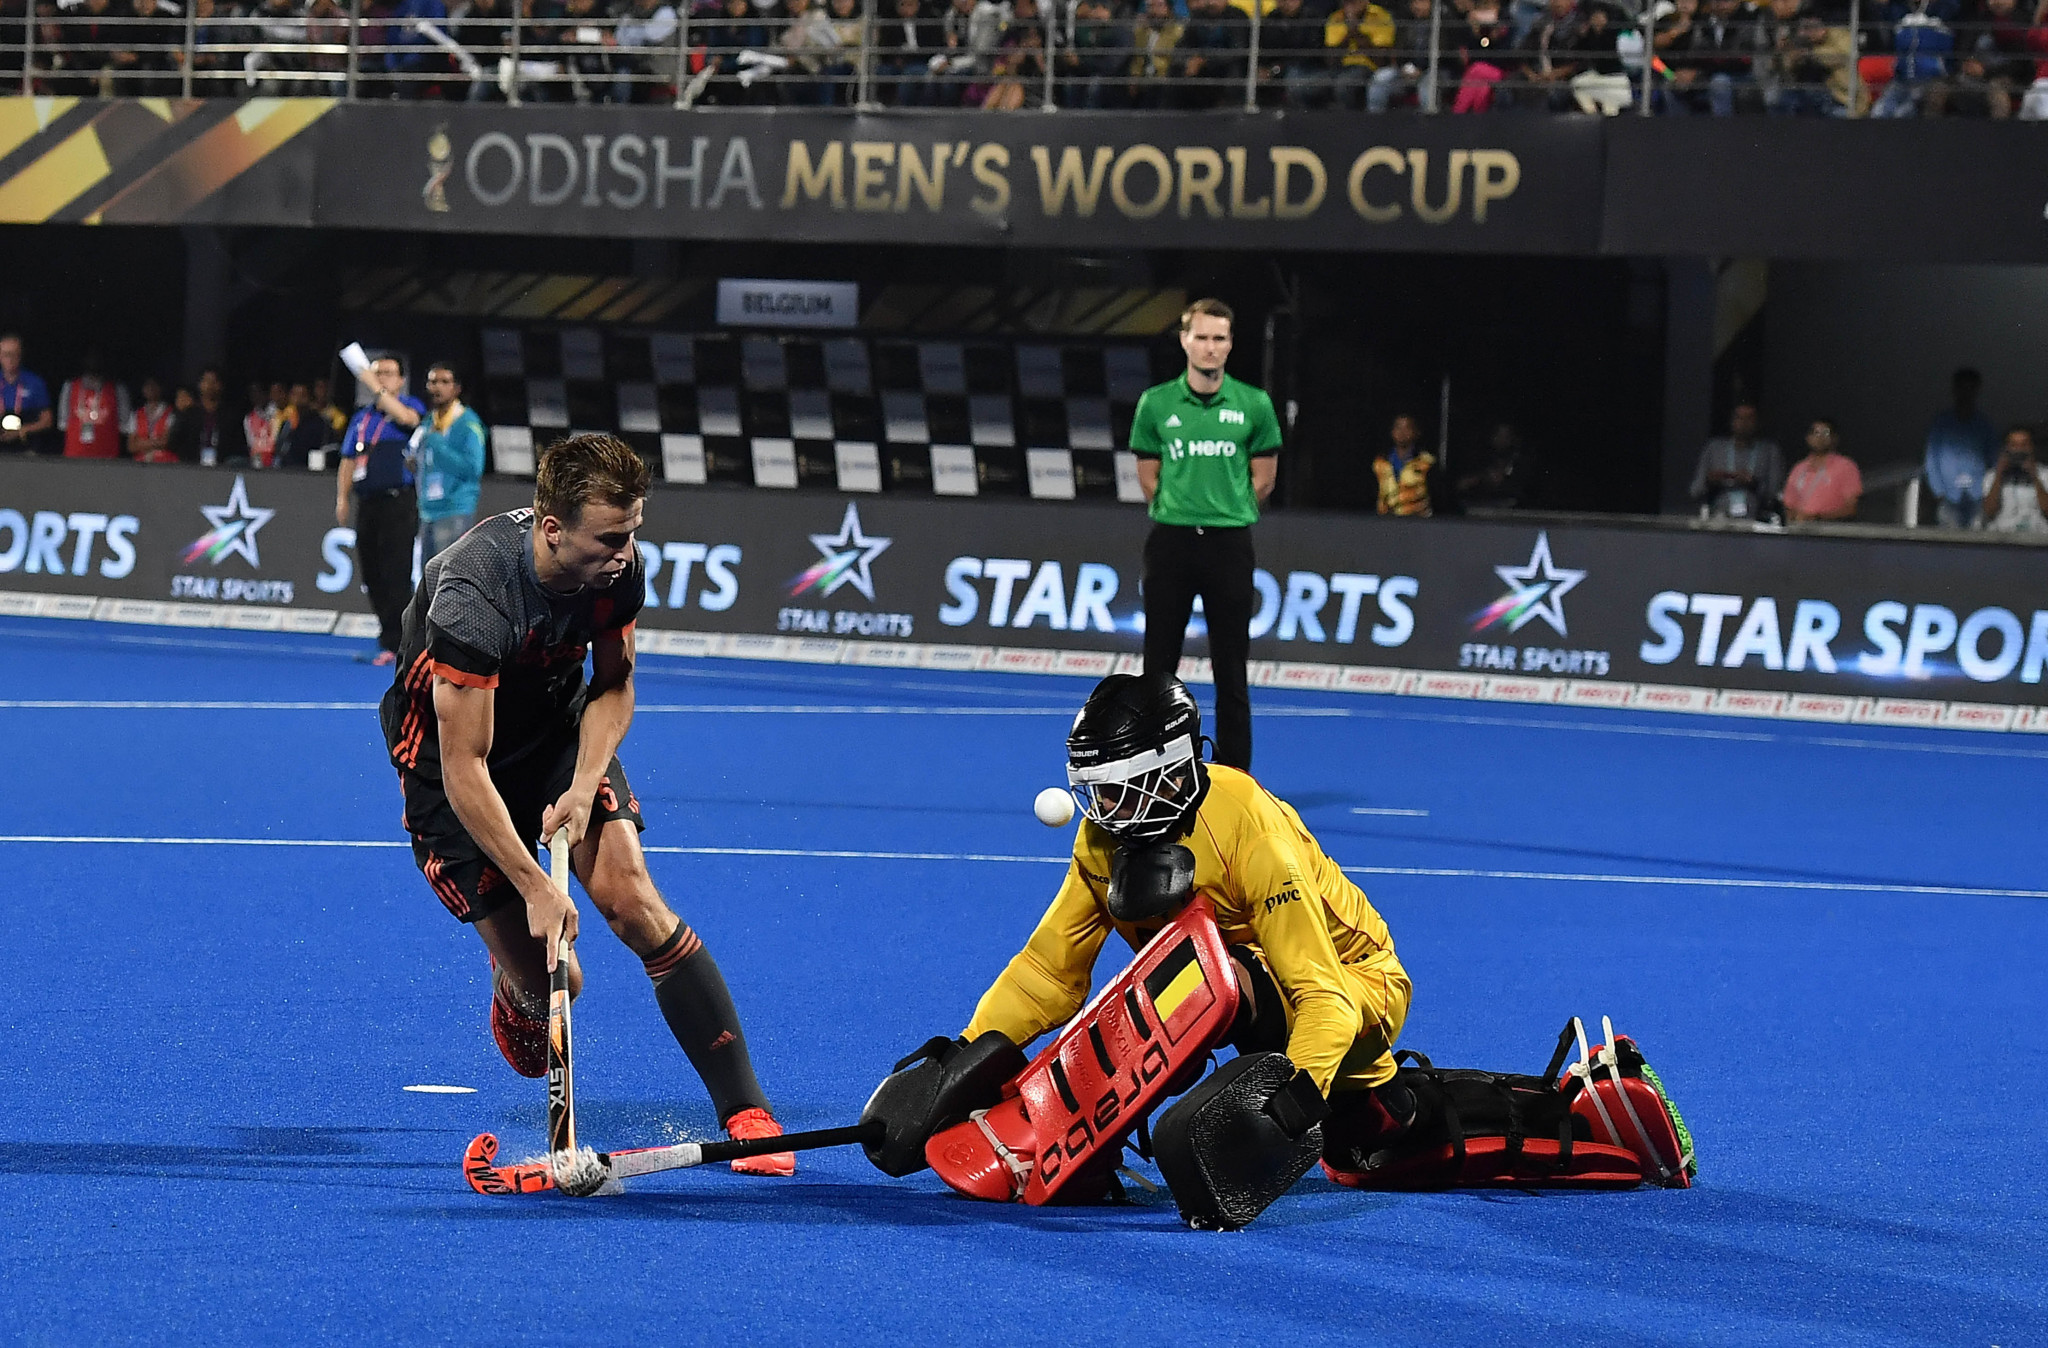 All FIH matches this year will be available on the platform, everywhere a broadcaster is not already showing the match ©Getty Images